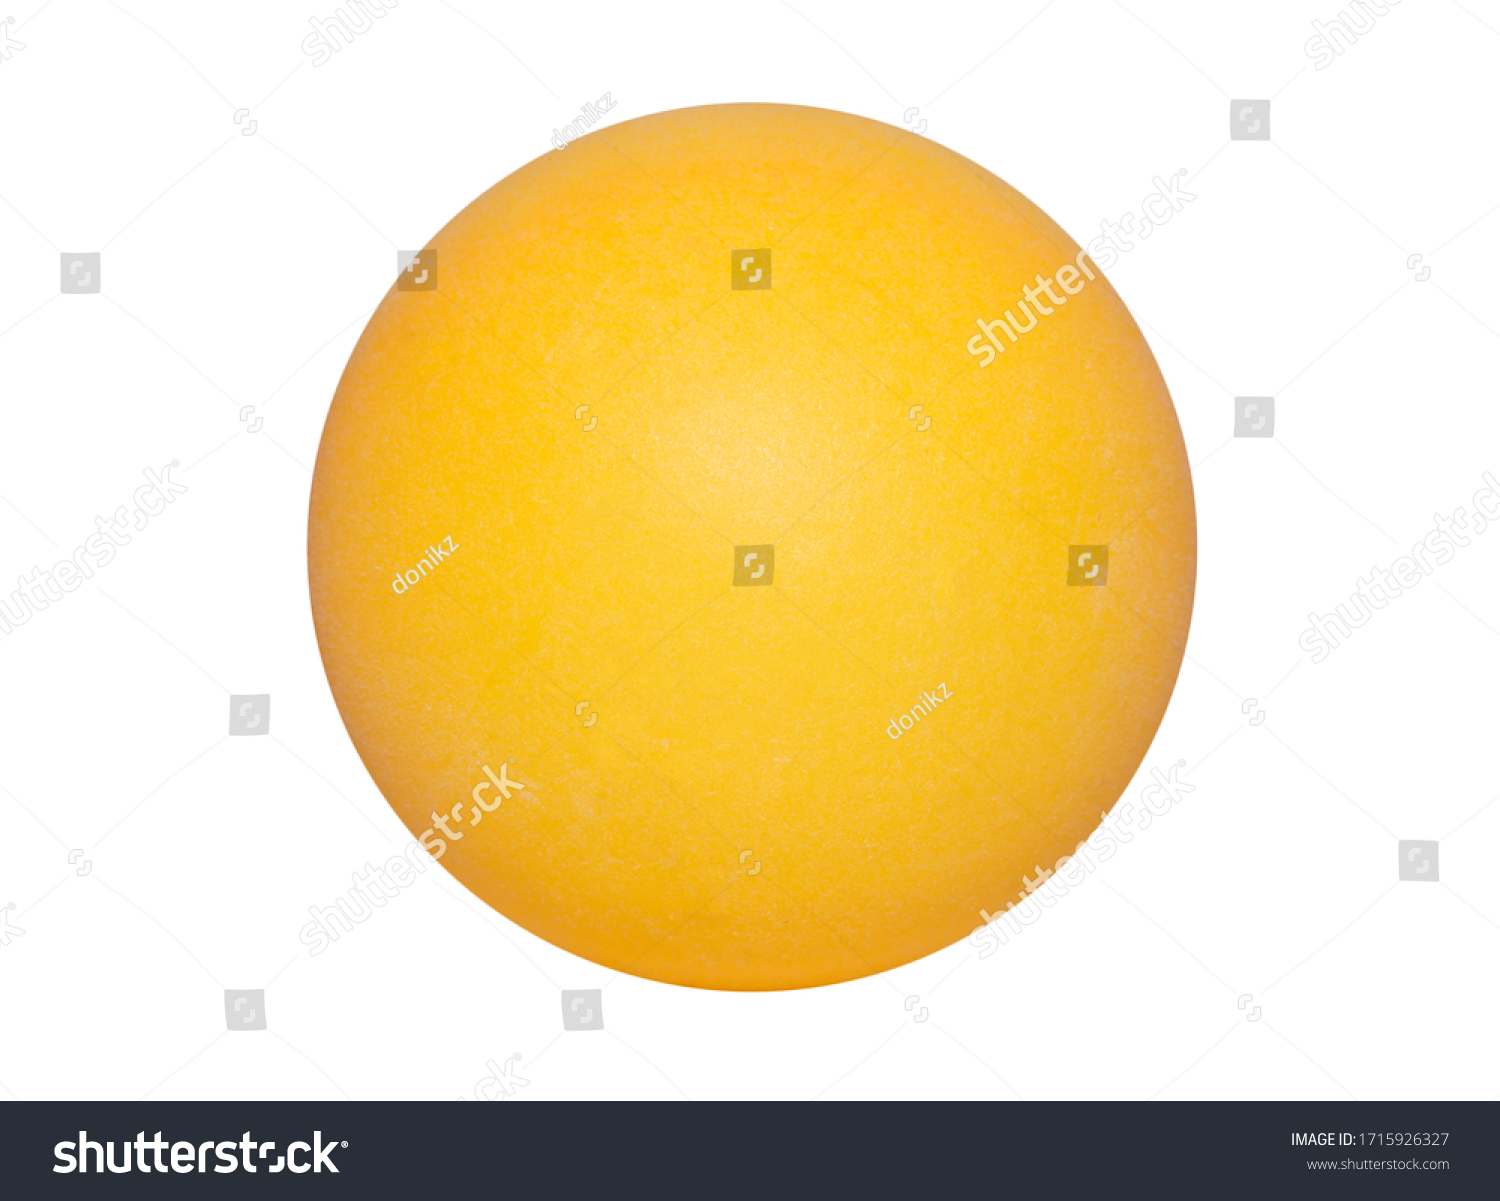 ball for table tennis on a white background #1715926327